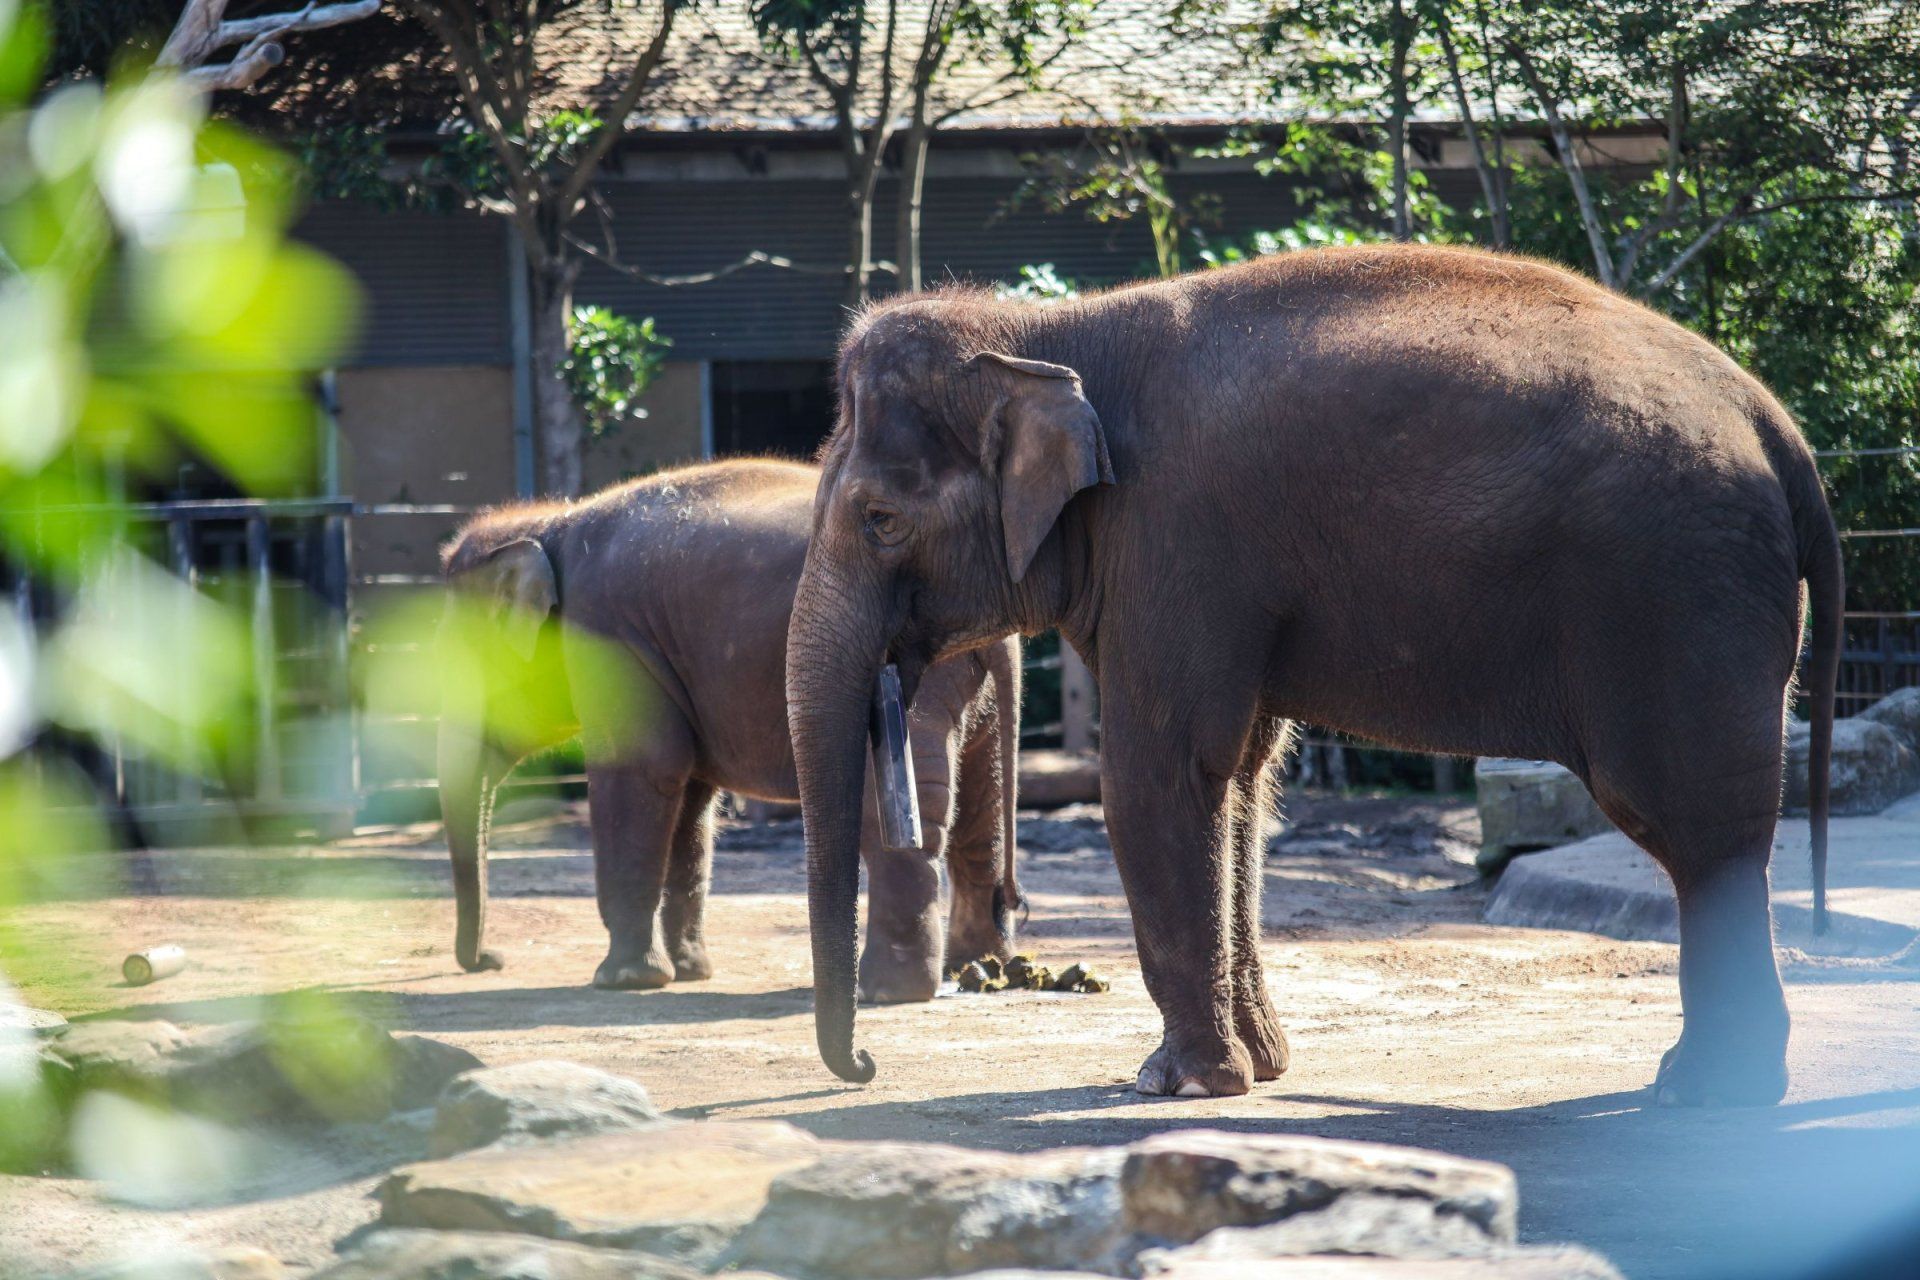 two elephants are standing next to each other in a zoo enclosure